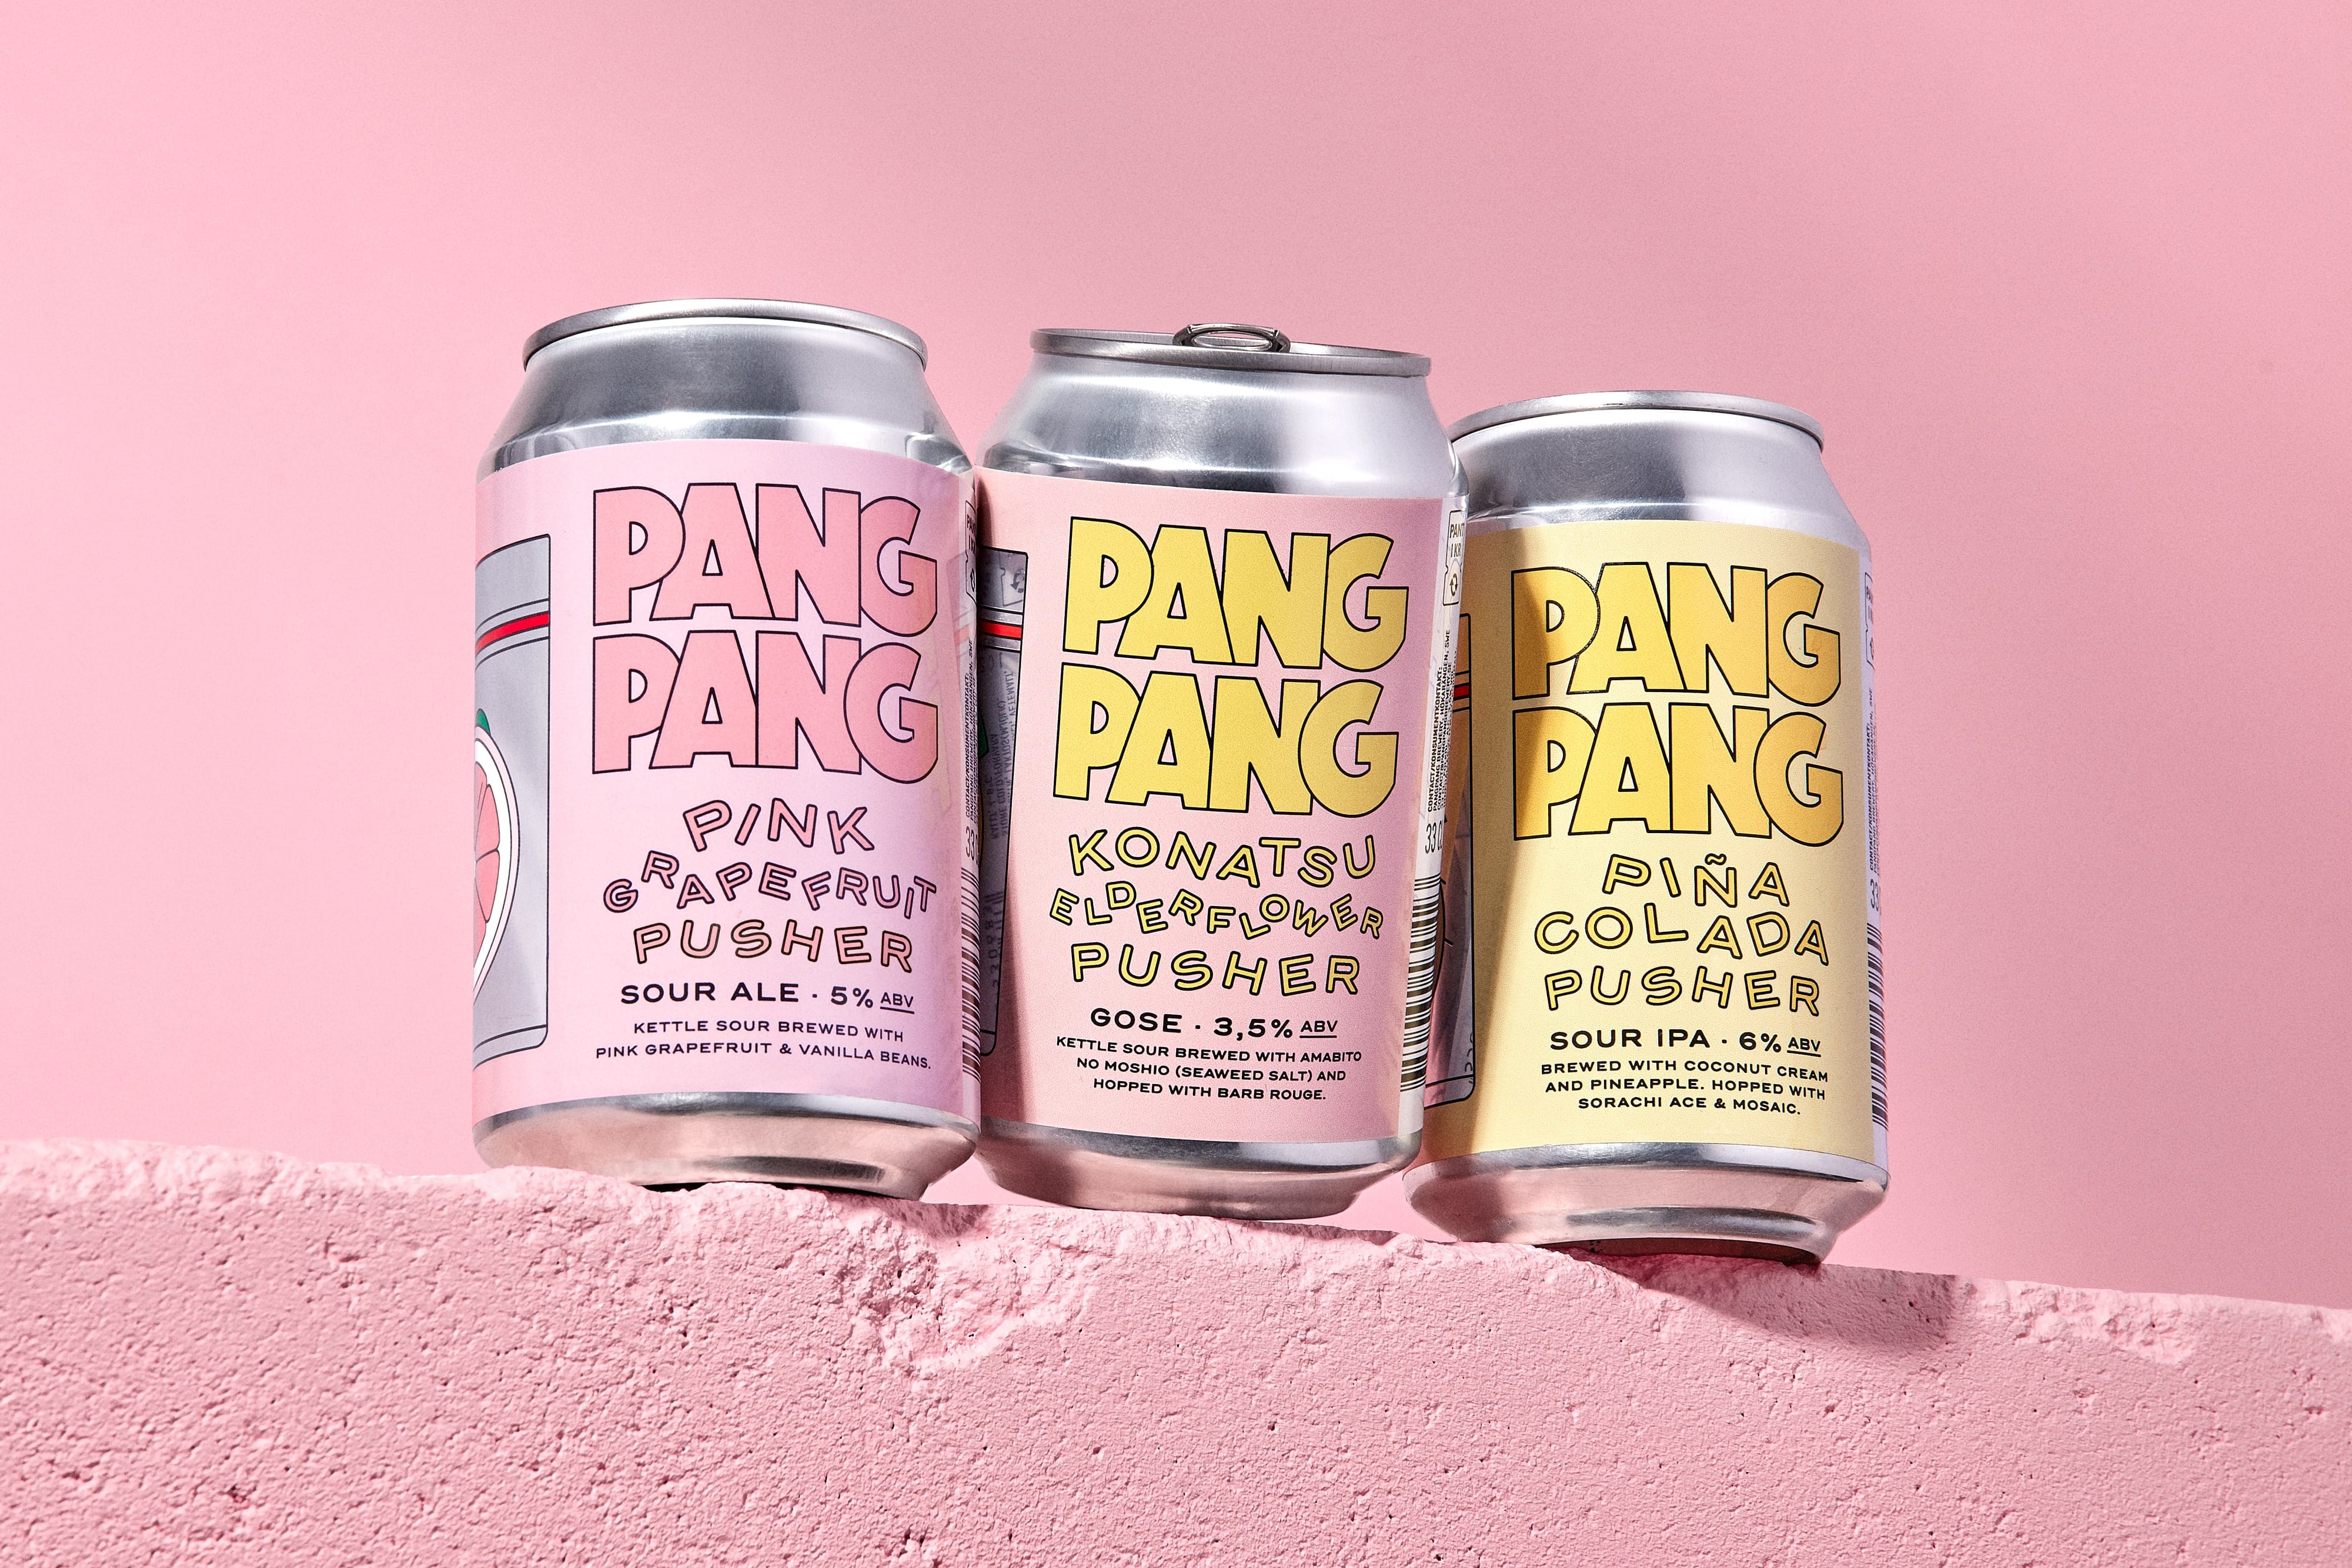 PangPang Pusher Visually Leans Into The World Of Sour Beers | Dieline ...